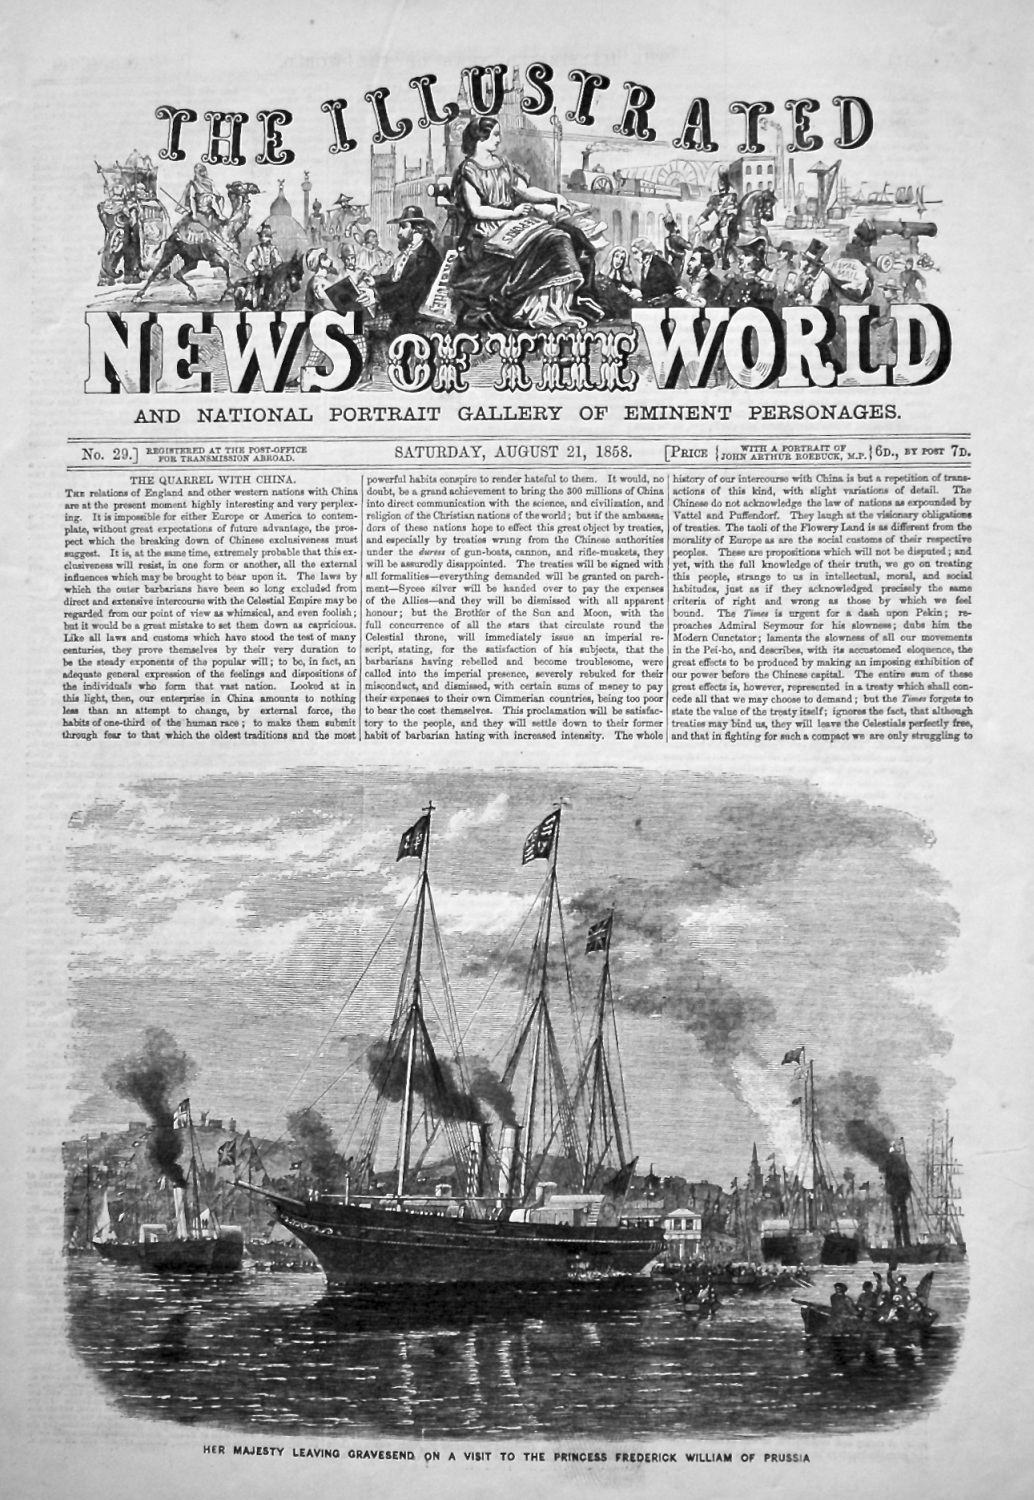 The Illustrated News of the World, August 21st, 1858.